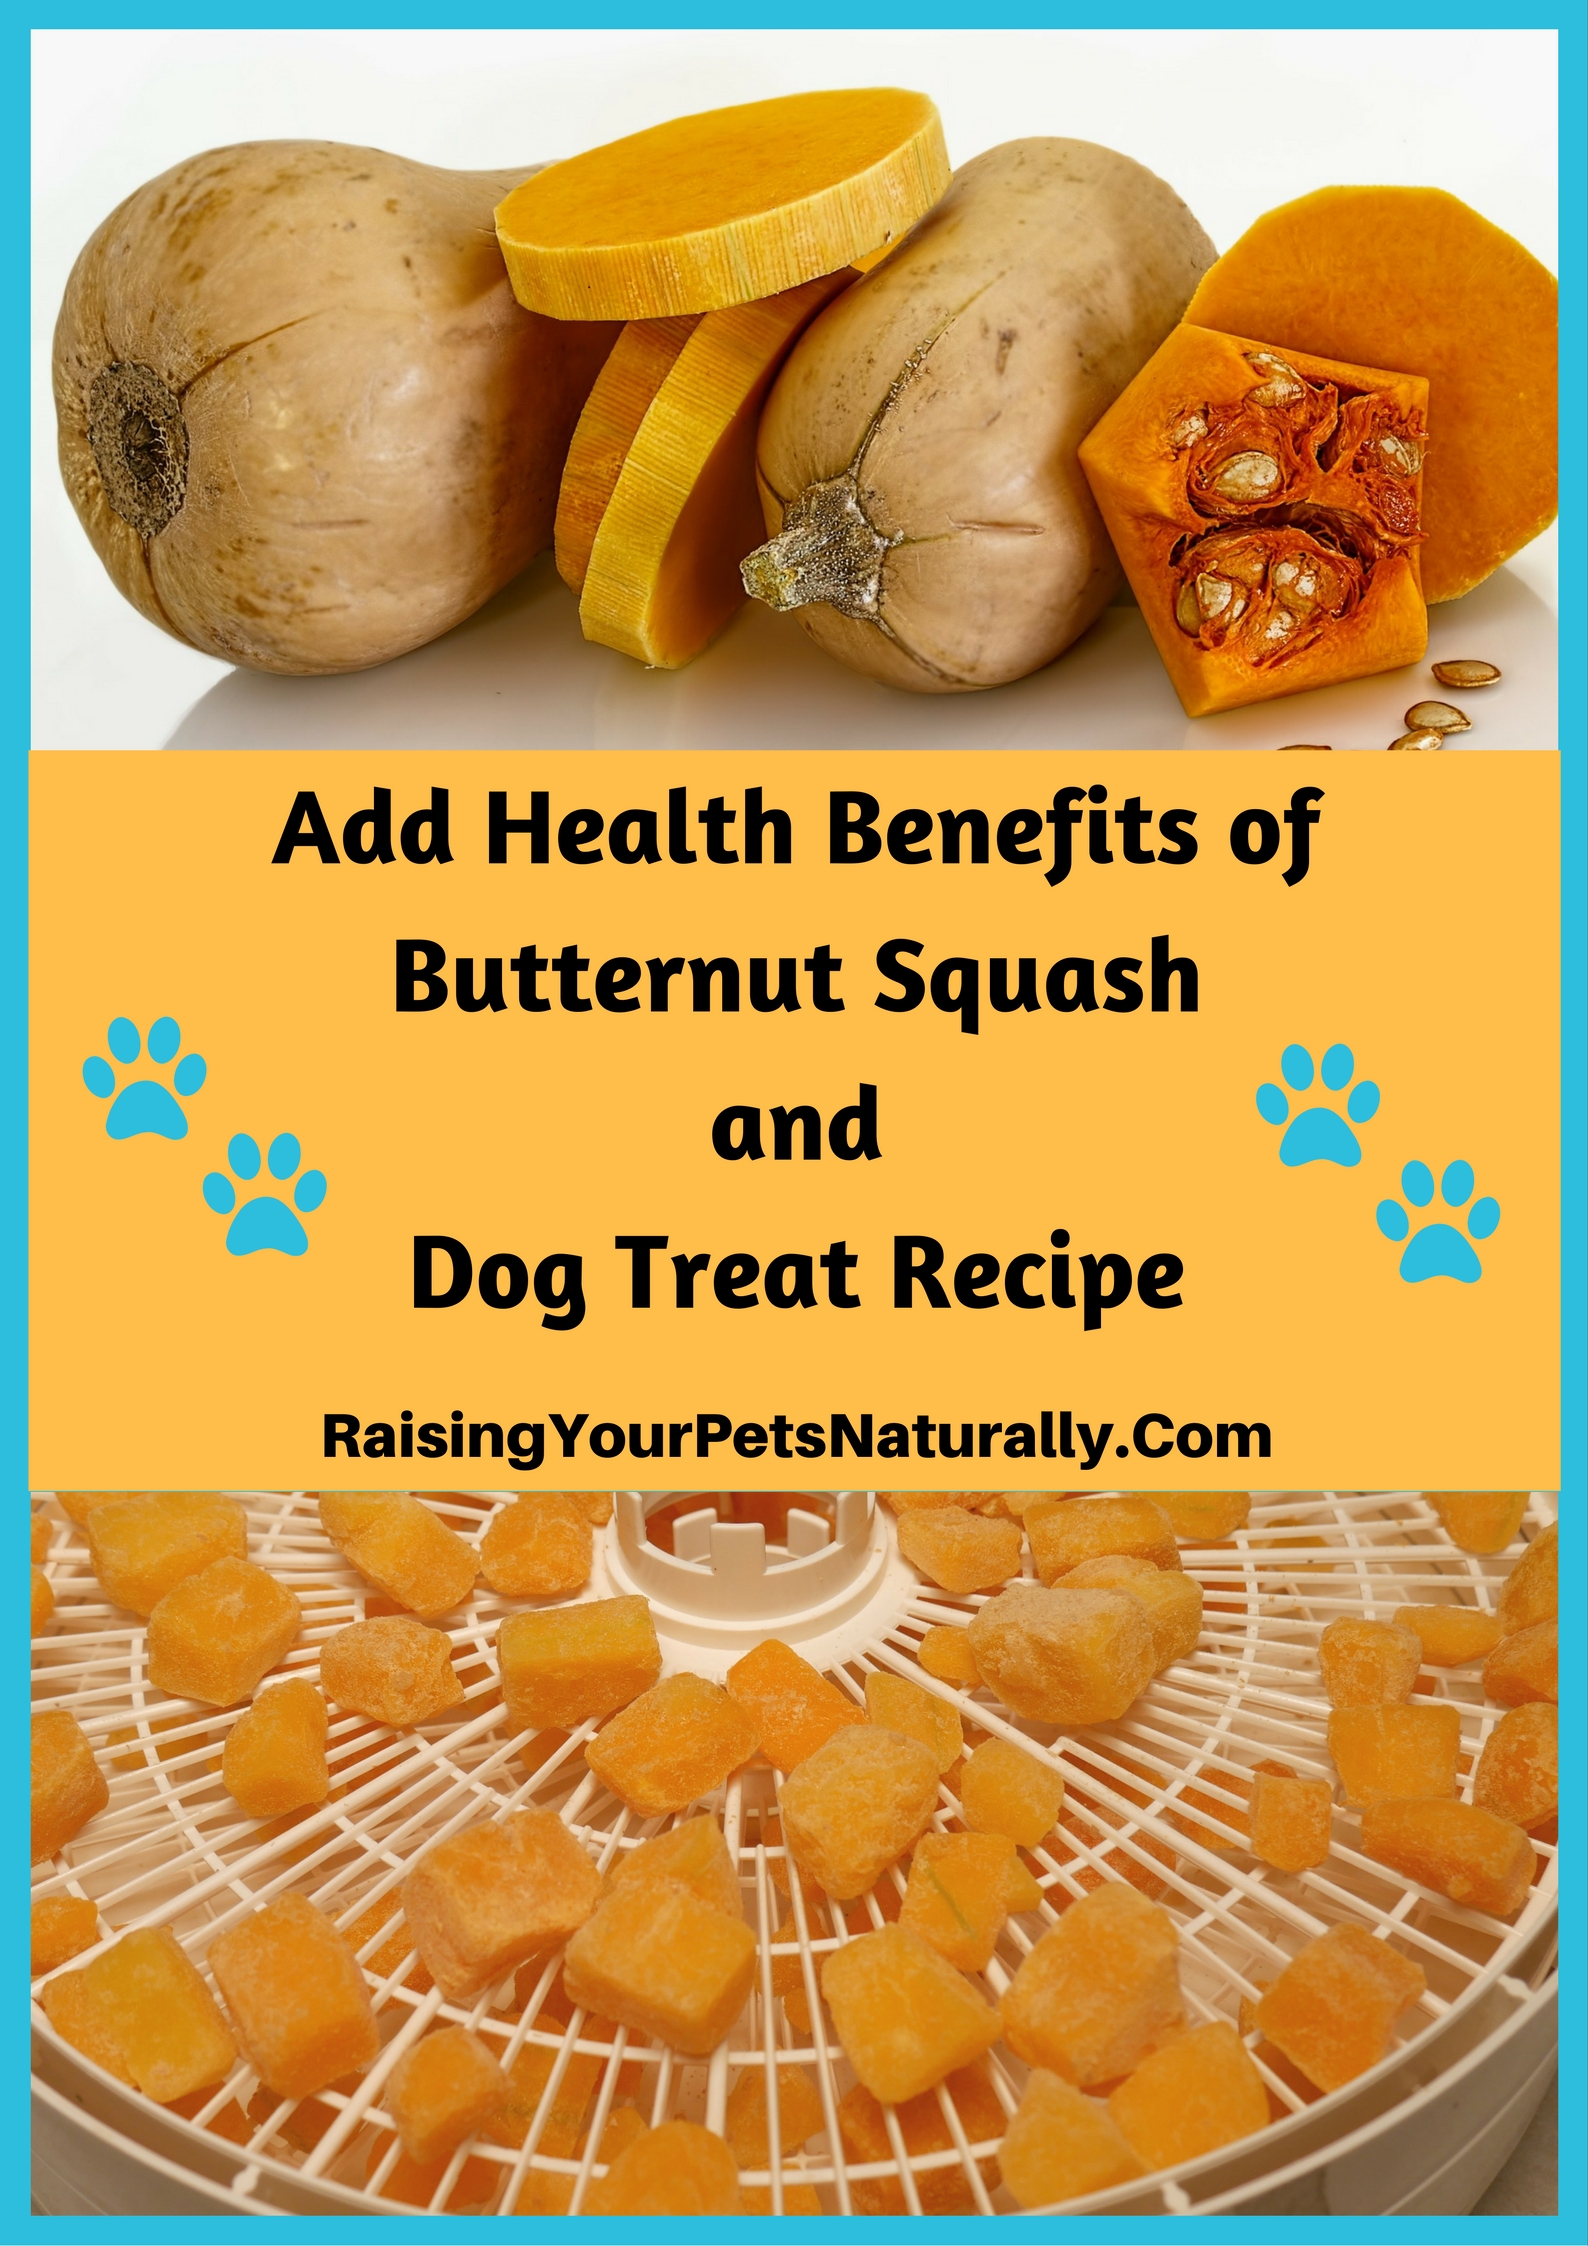 Learn the health benefits of butternut squash for dogs, cats and people. A healthy dog treat recipe is in the article as a bonus! Visit www.raisingyourpetsnaturally.com and search squash.